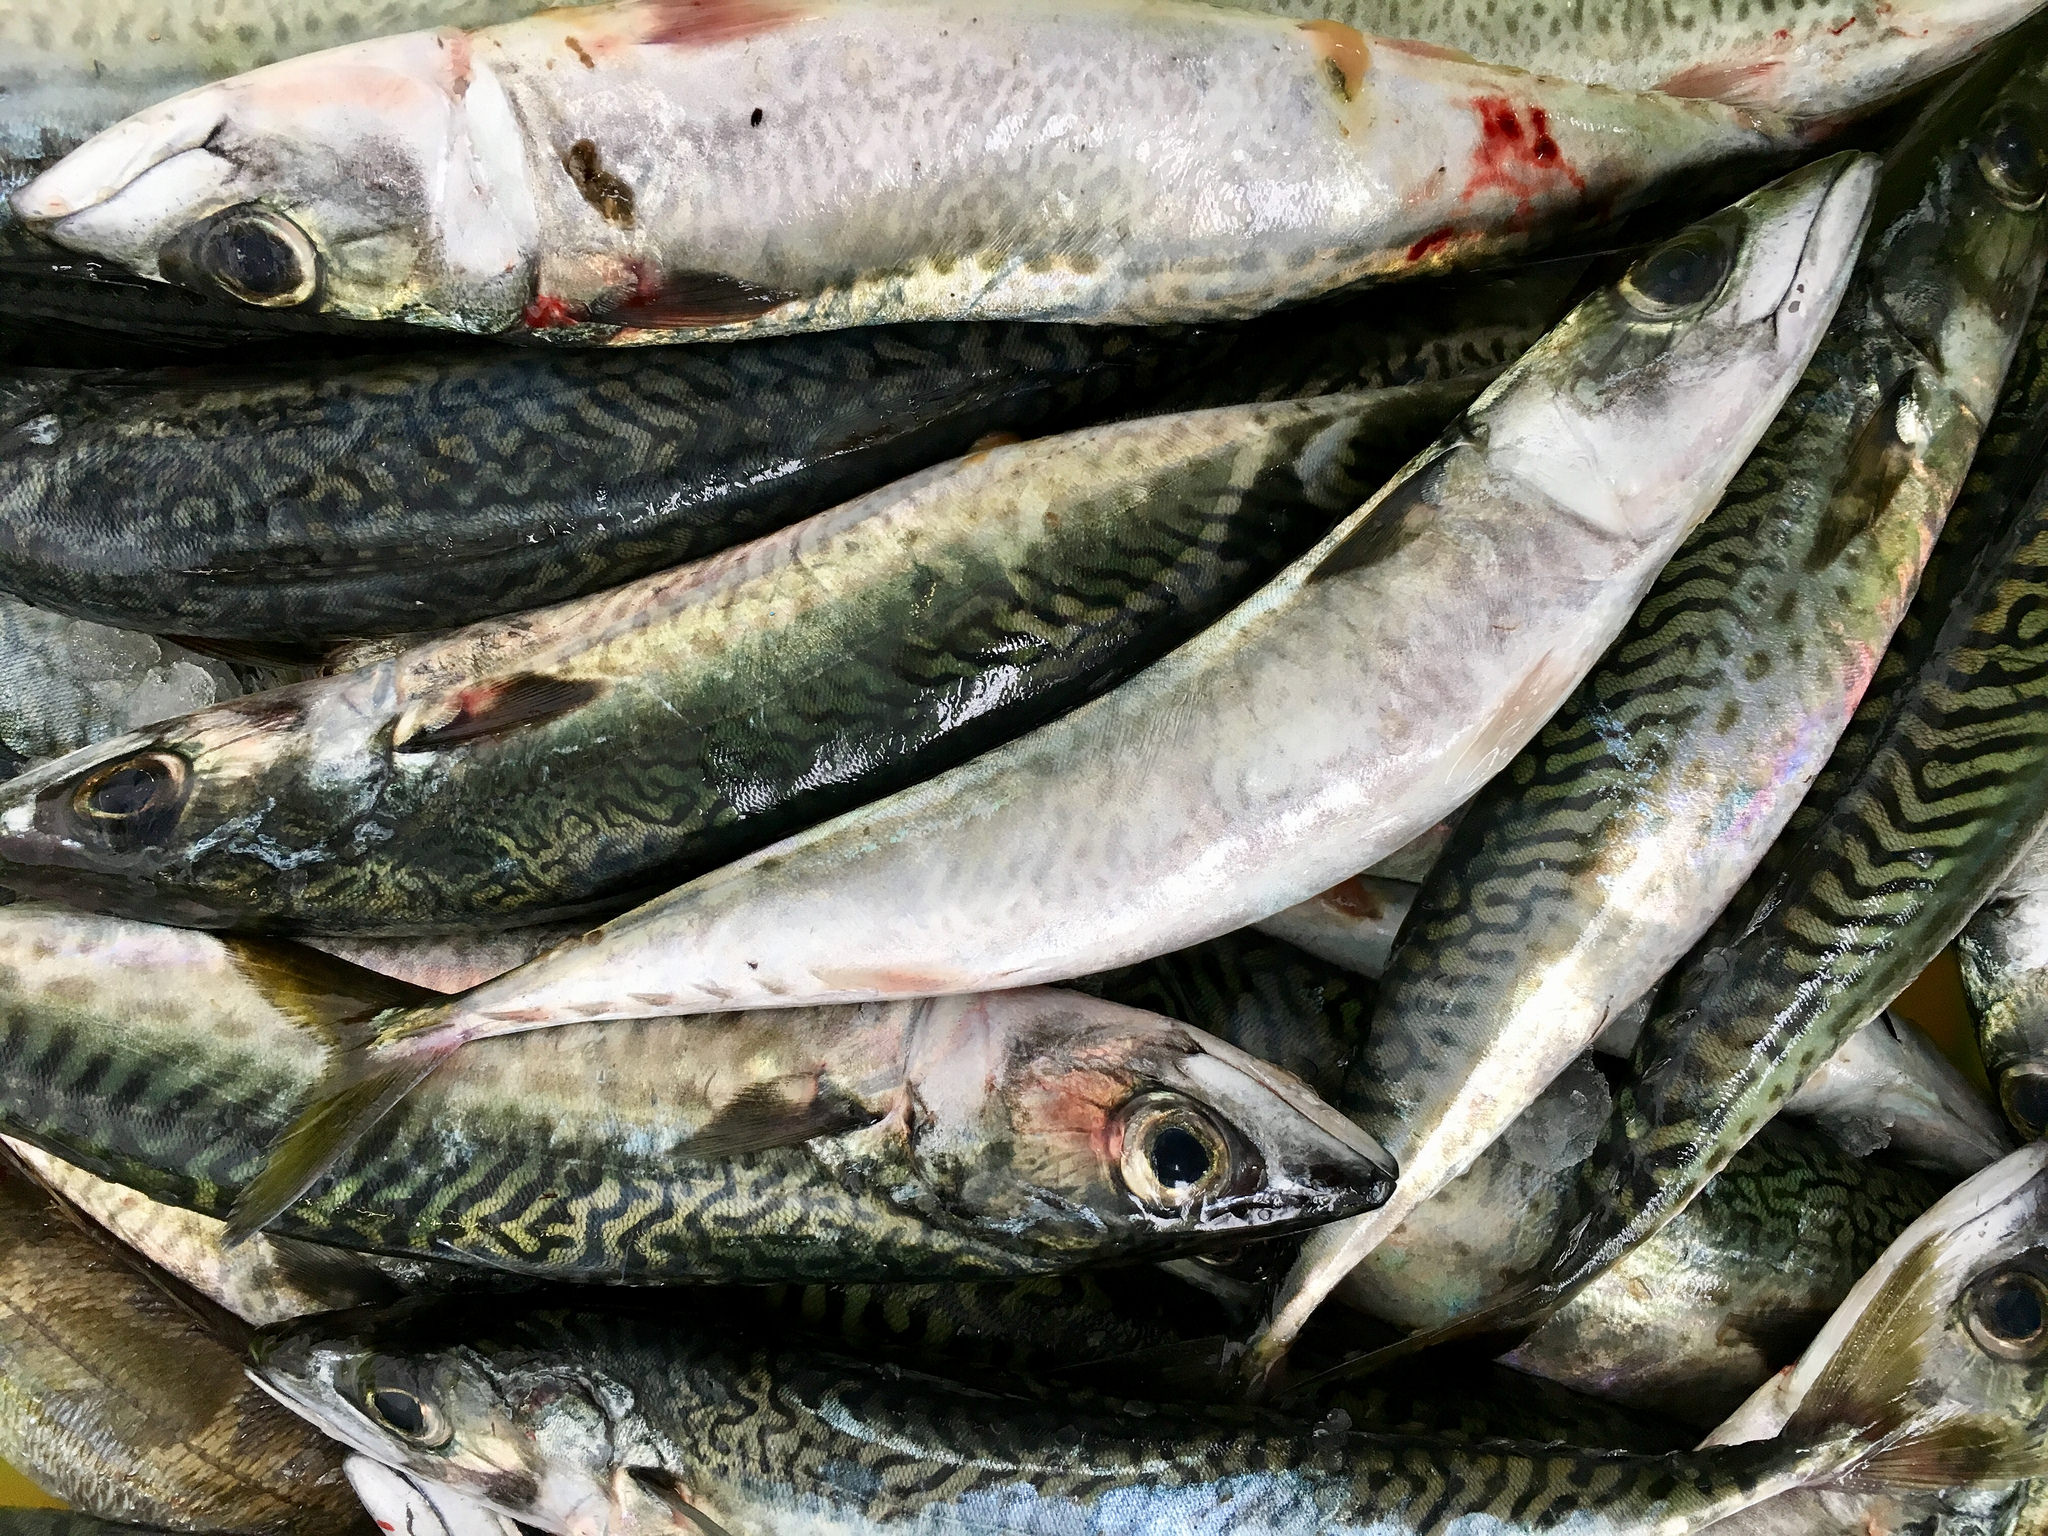 FFAW Calls on DFO to Re-open Mackerel Fishery, Says Biomass Estimates of Low Abundance are Wrong